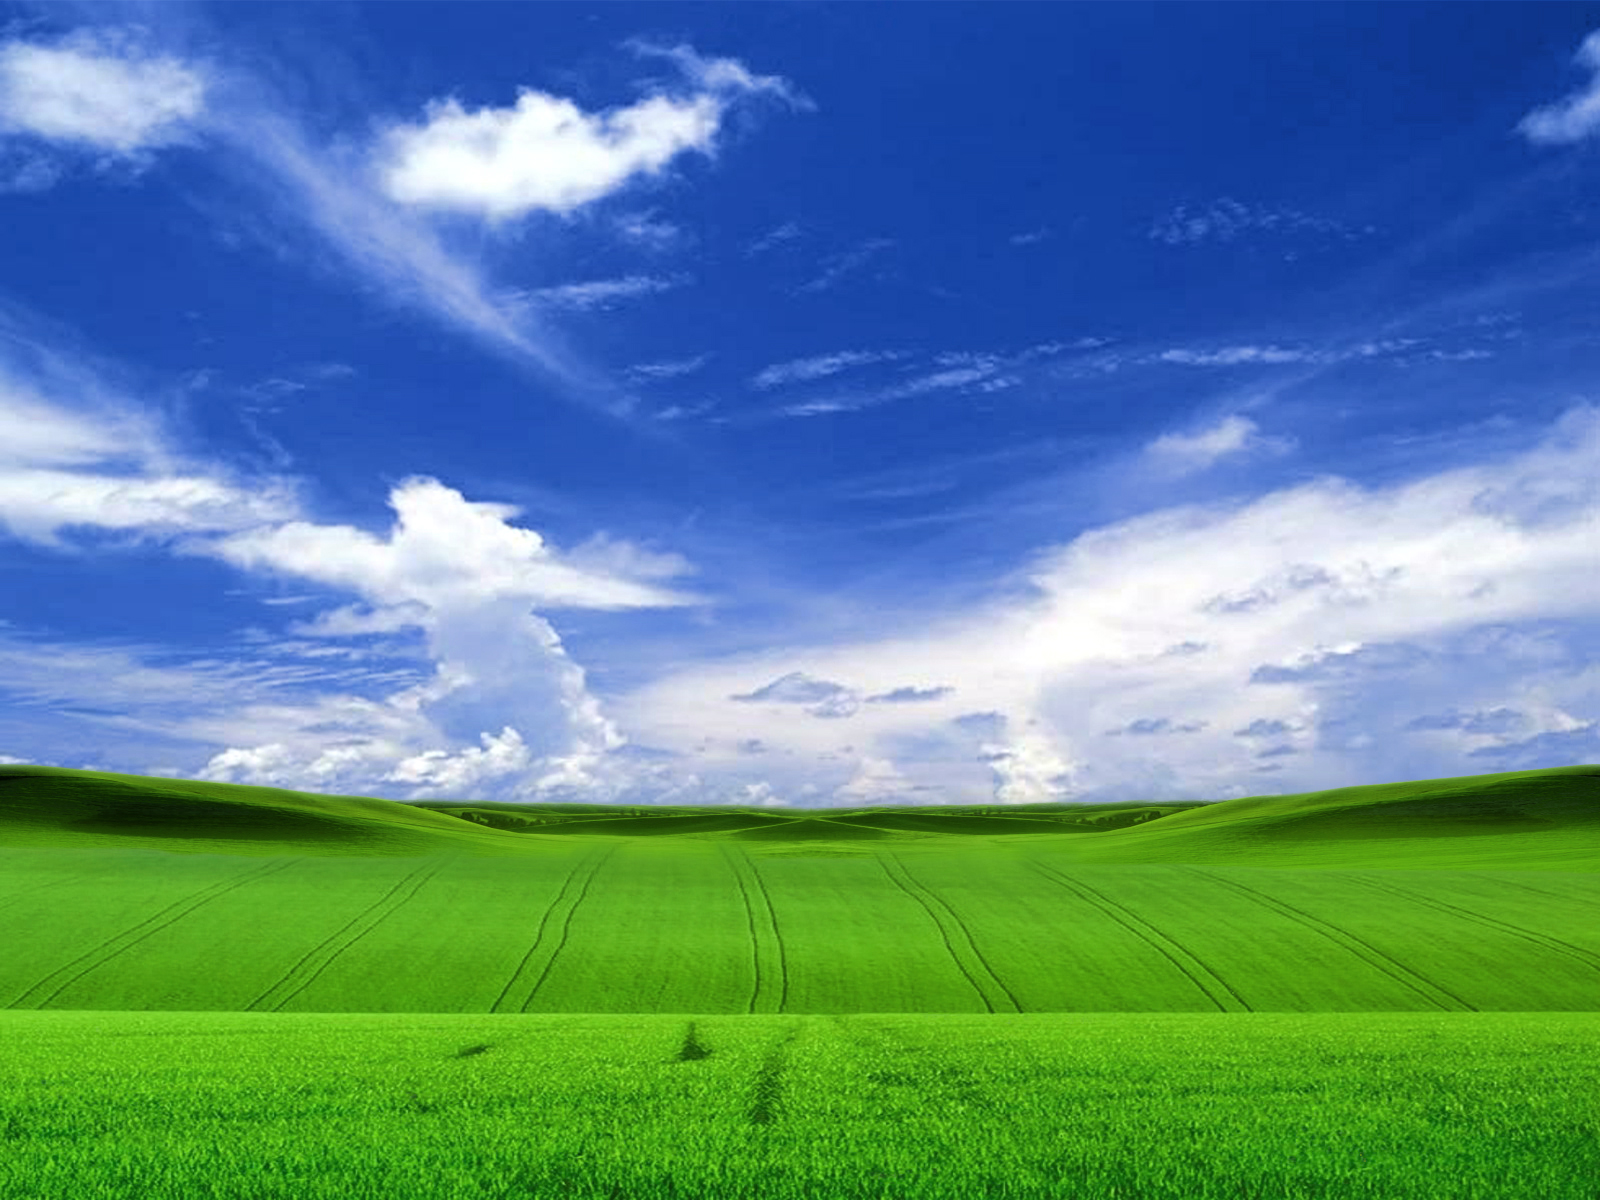 Obvious Chemtrail Images Among Microsofts Windows Wallpapers